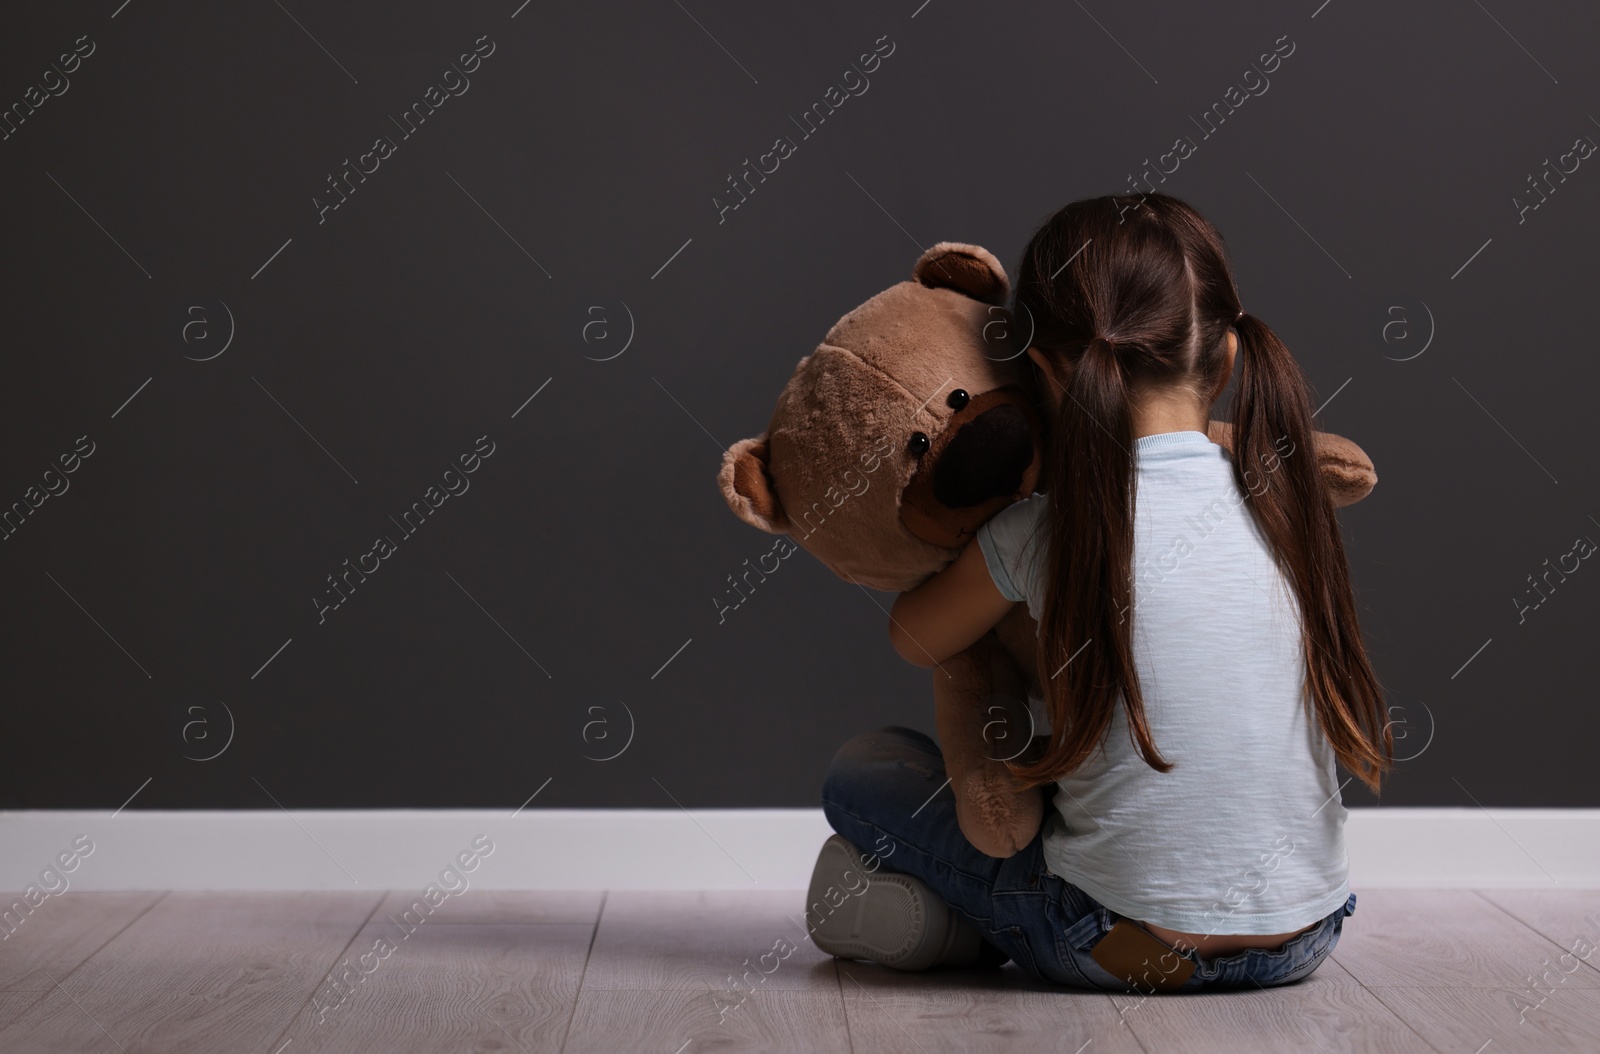 Photo of Child abuse. Upset little girl with teddy bear sitting on floor near gray wall indoors, back view. Space for text